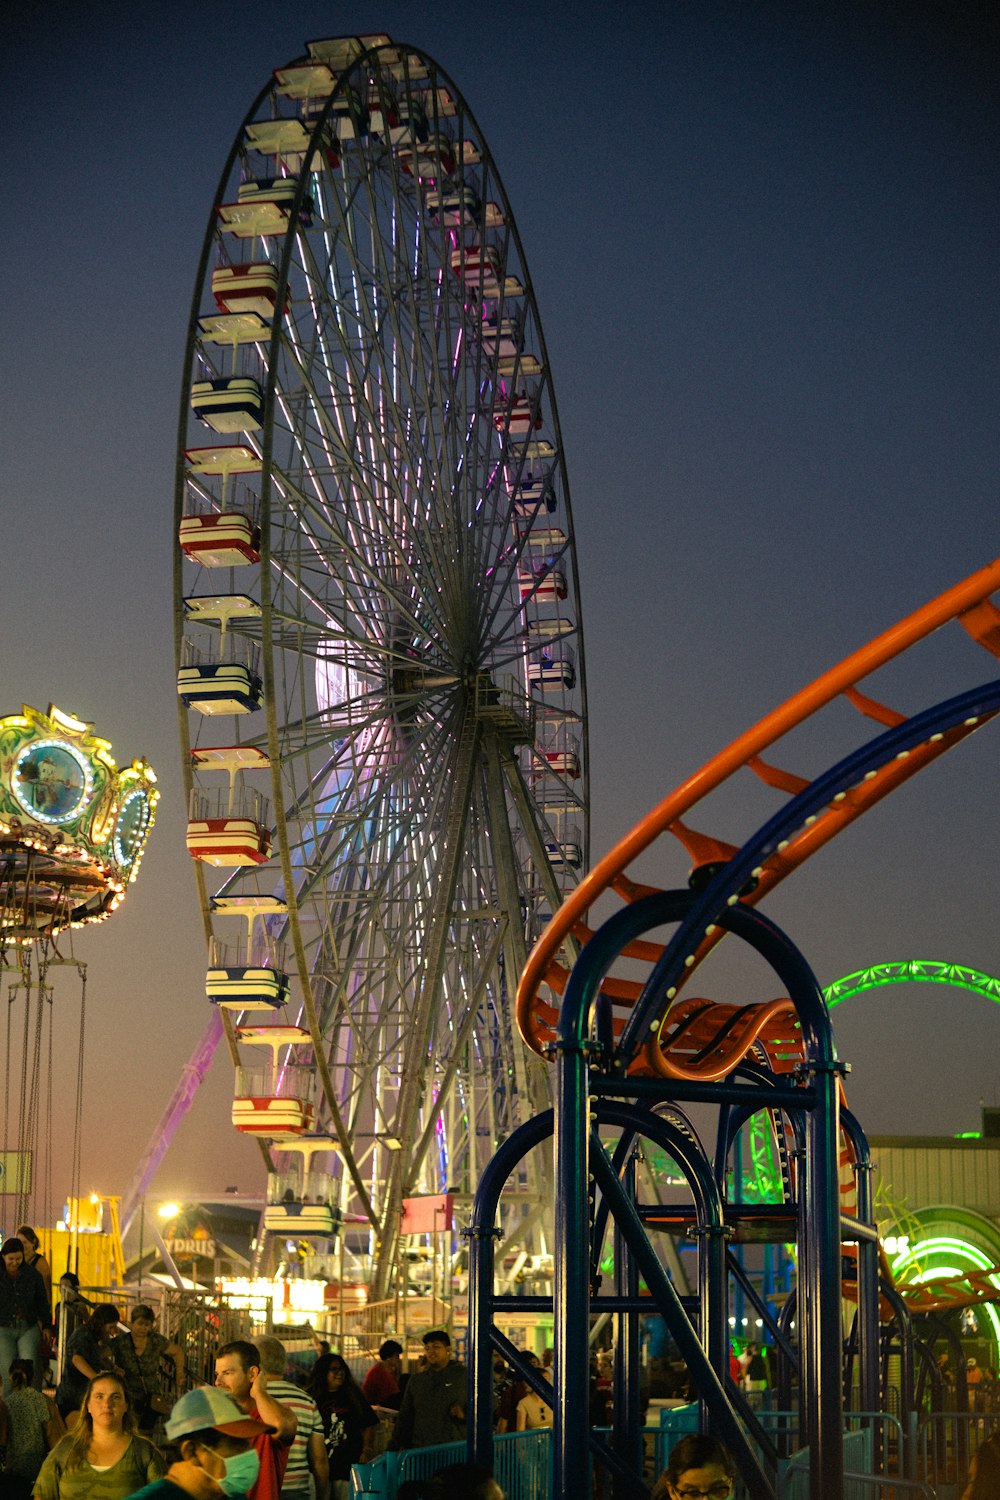 a large ferris wheel sitting next to a carnival ride